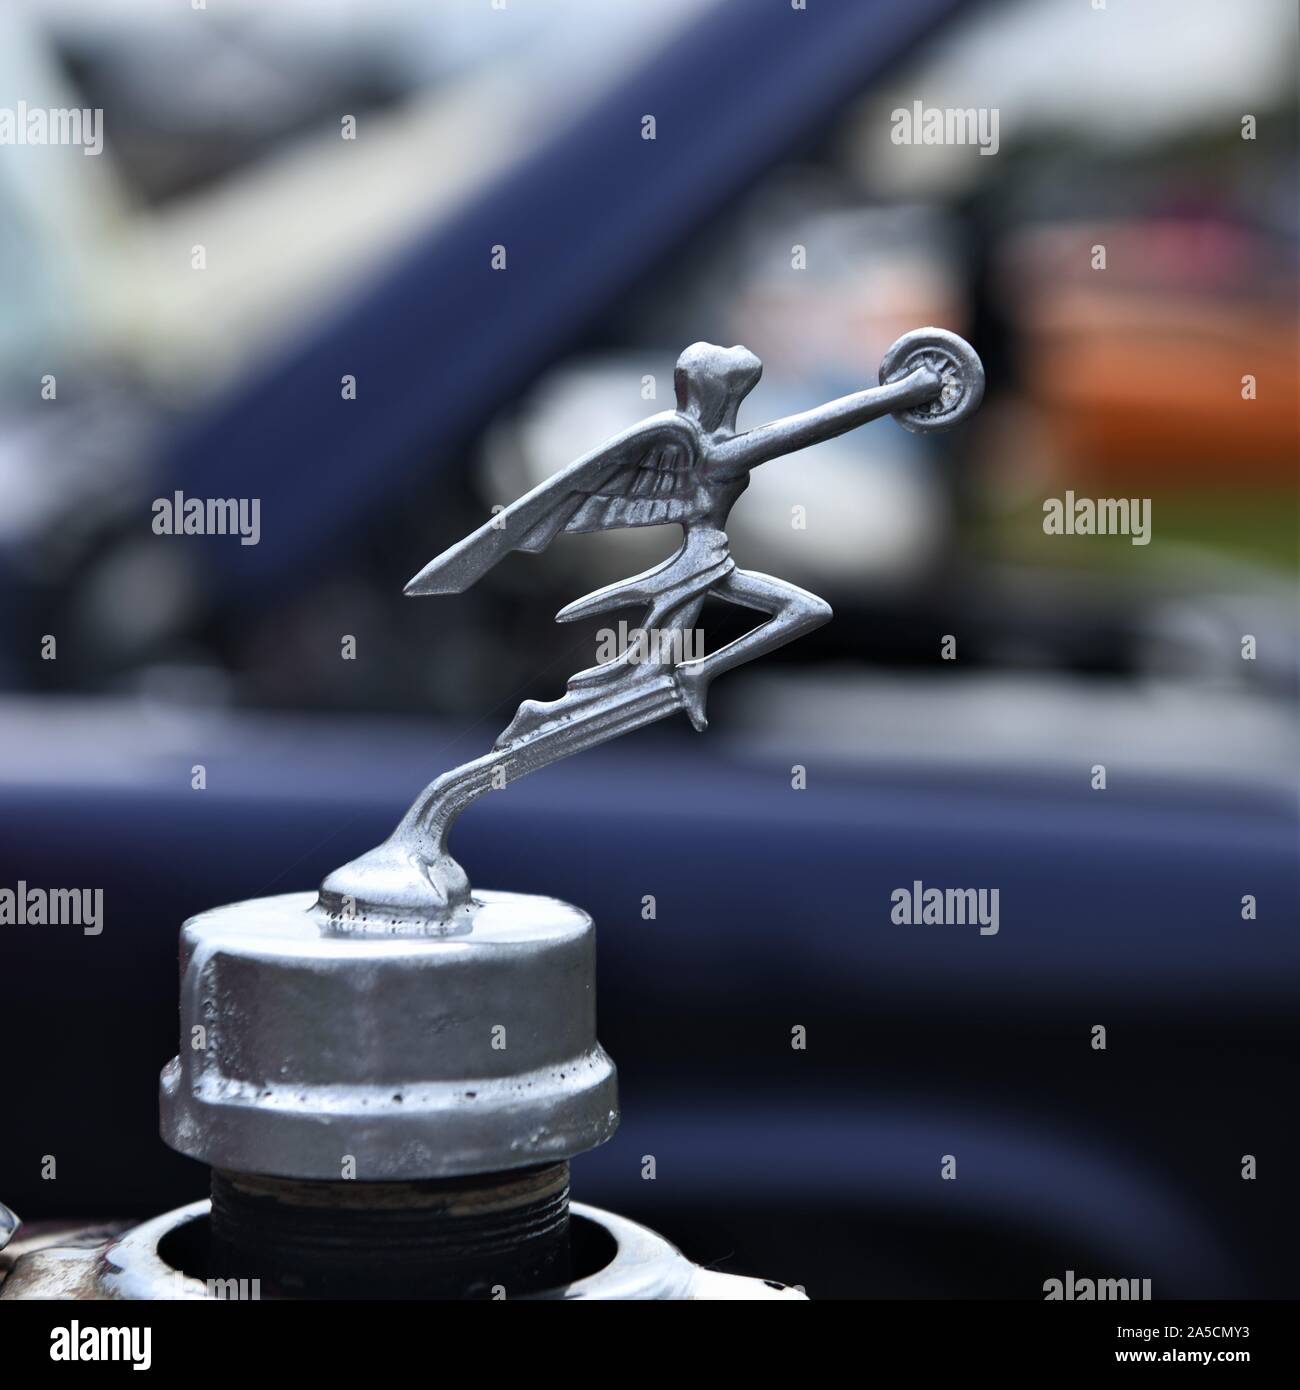 The Winged Lady hood ornament. Stock Photo